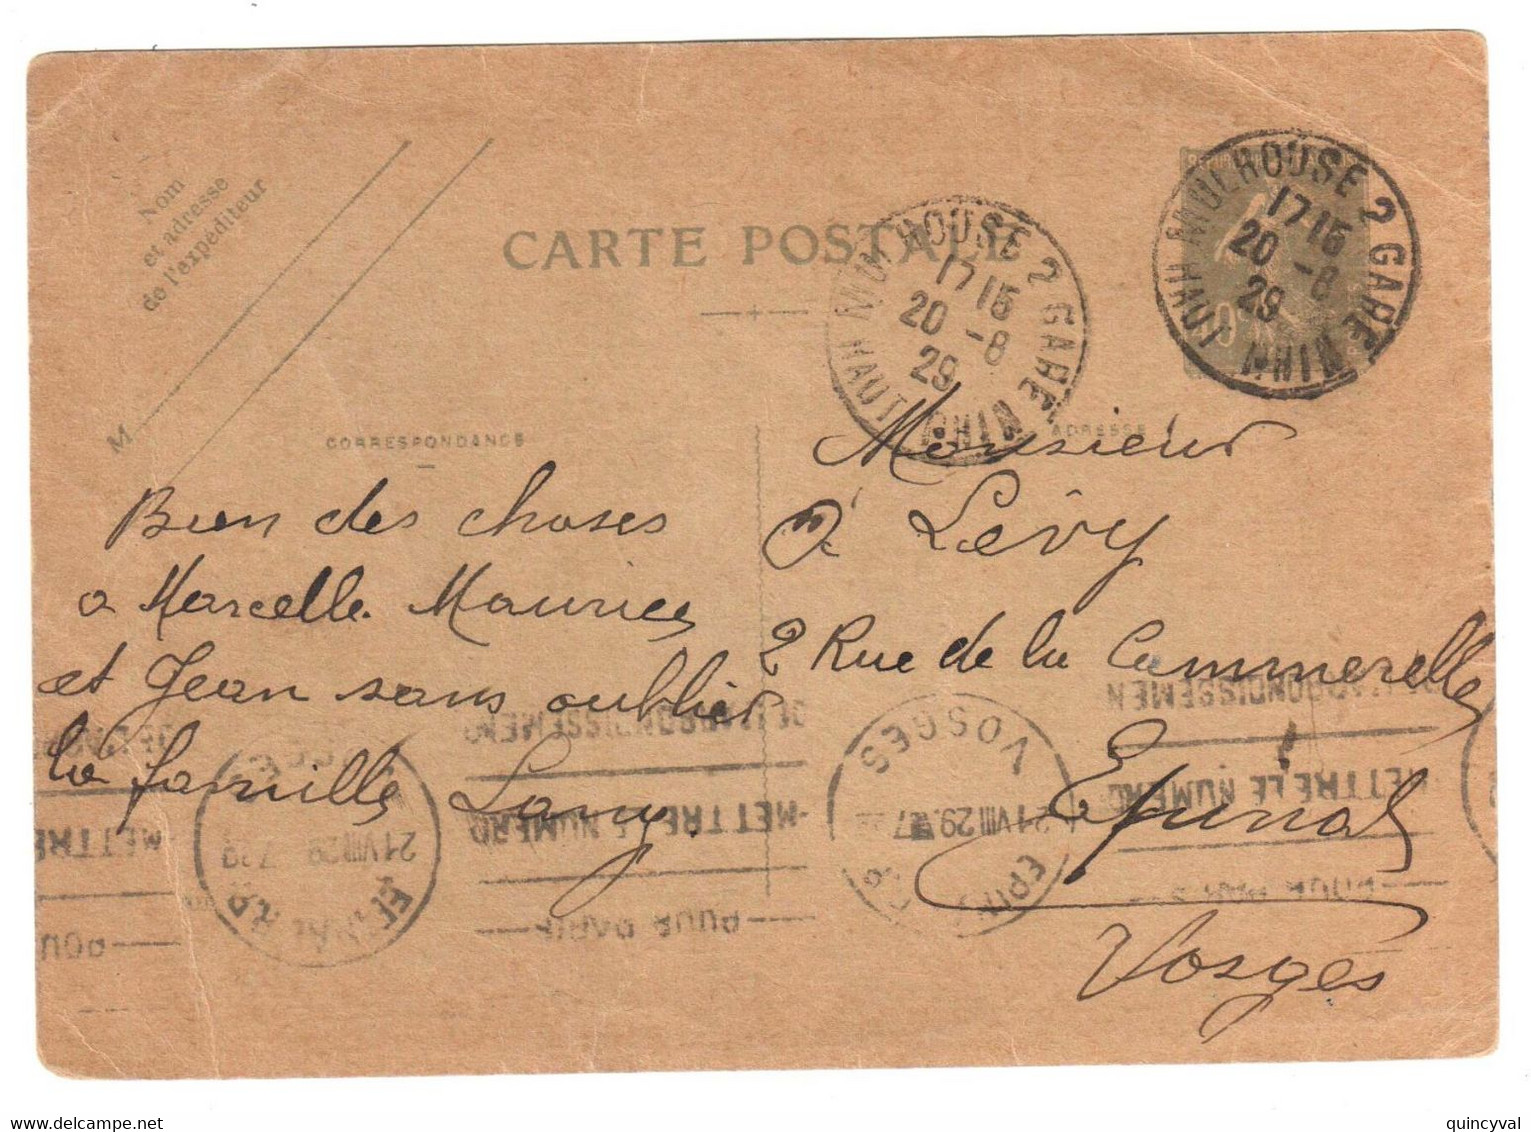 MULHOUSE 2 GARE Haut Rhin Carte Postale Entier 40c Semeuse Outremer Millésime?09 Dest Epinal Ob 1929 Yv 237-CP1 - Standard Postcards & Stamped On Demand (before 1995)